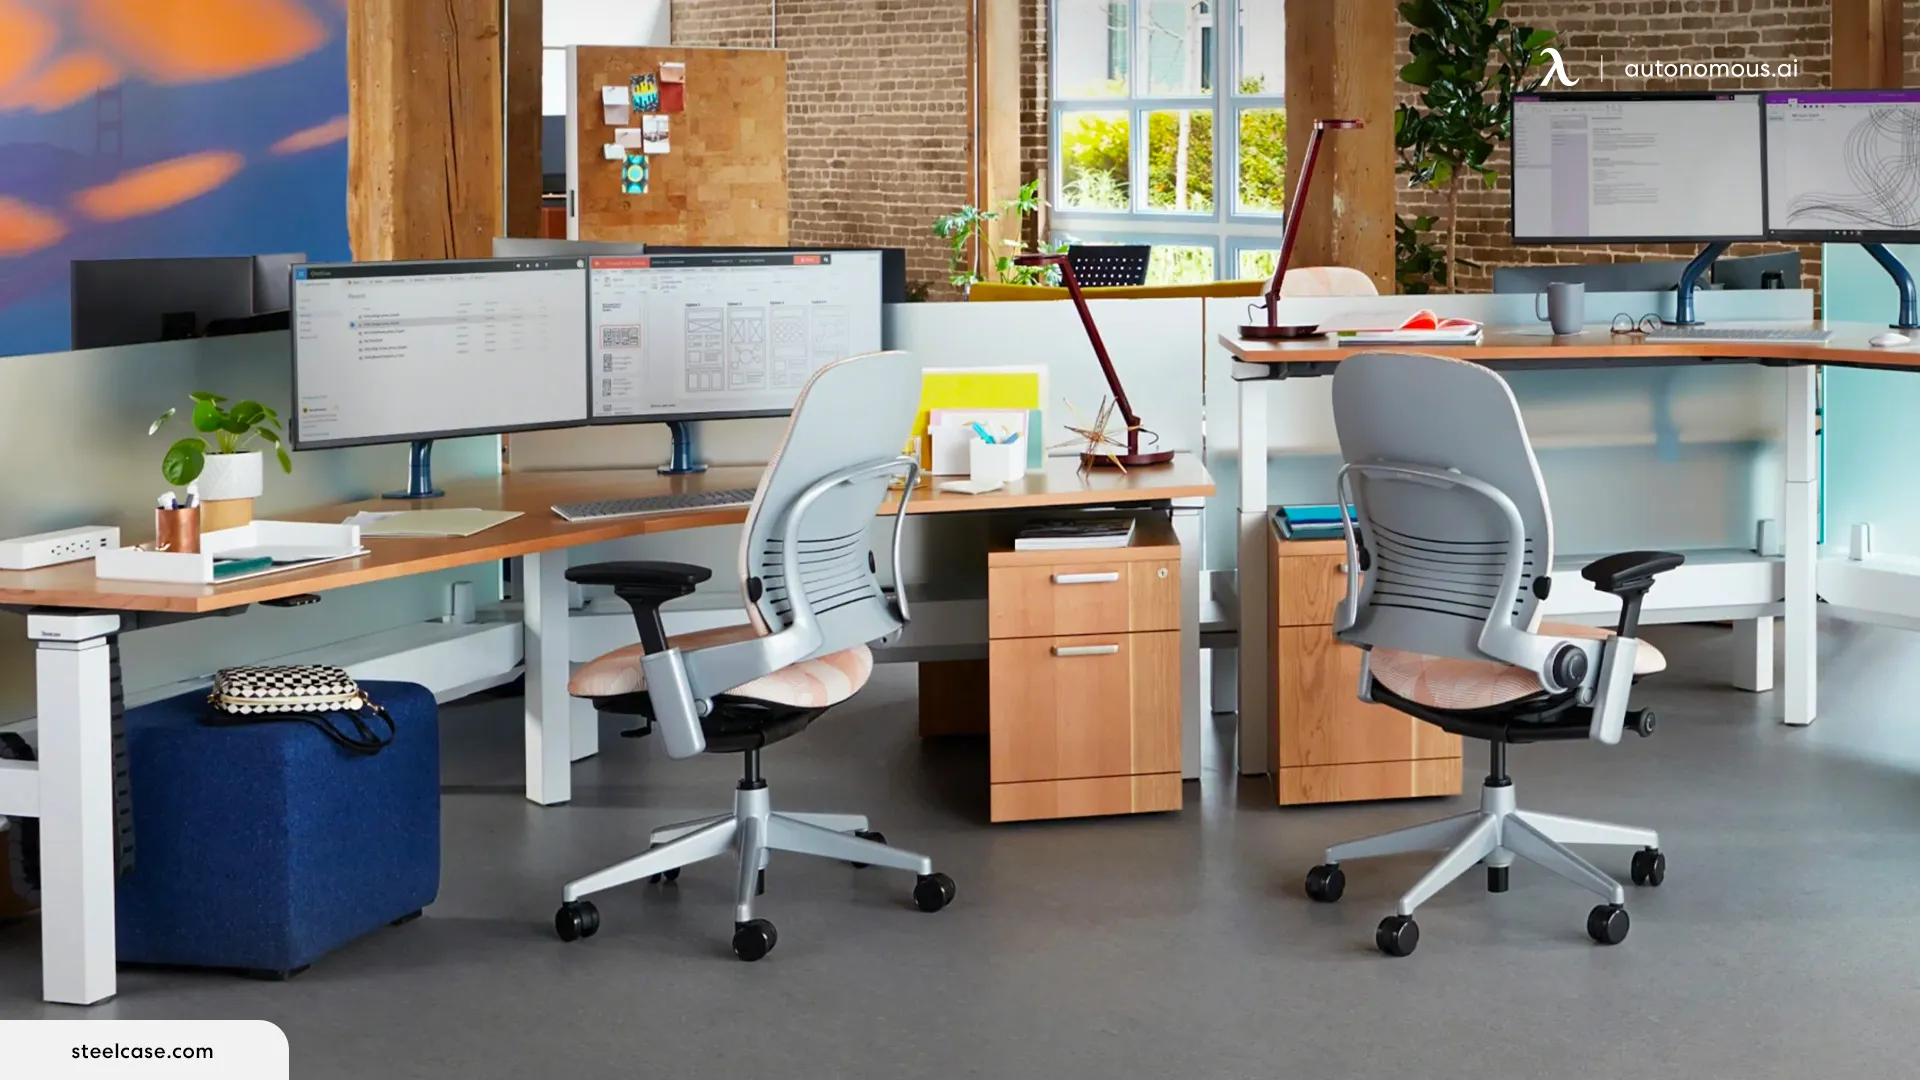 Leap Chair by Steelcase: Is It the Ultimate Office Chair?